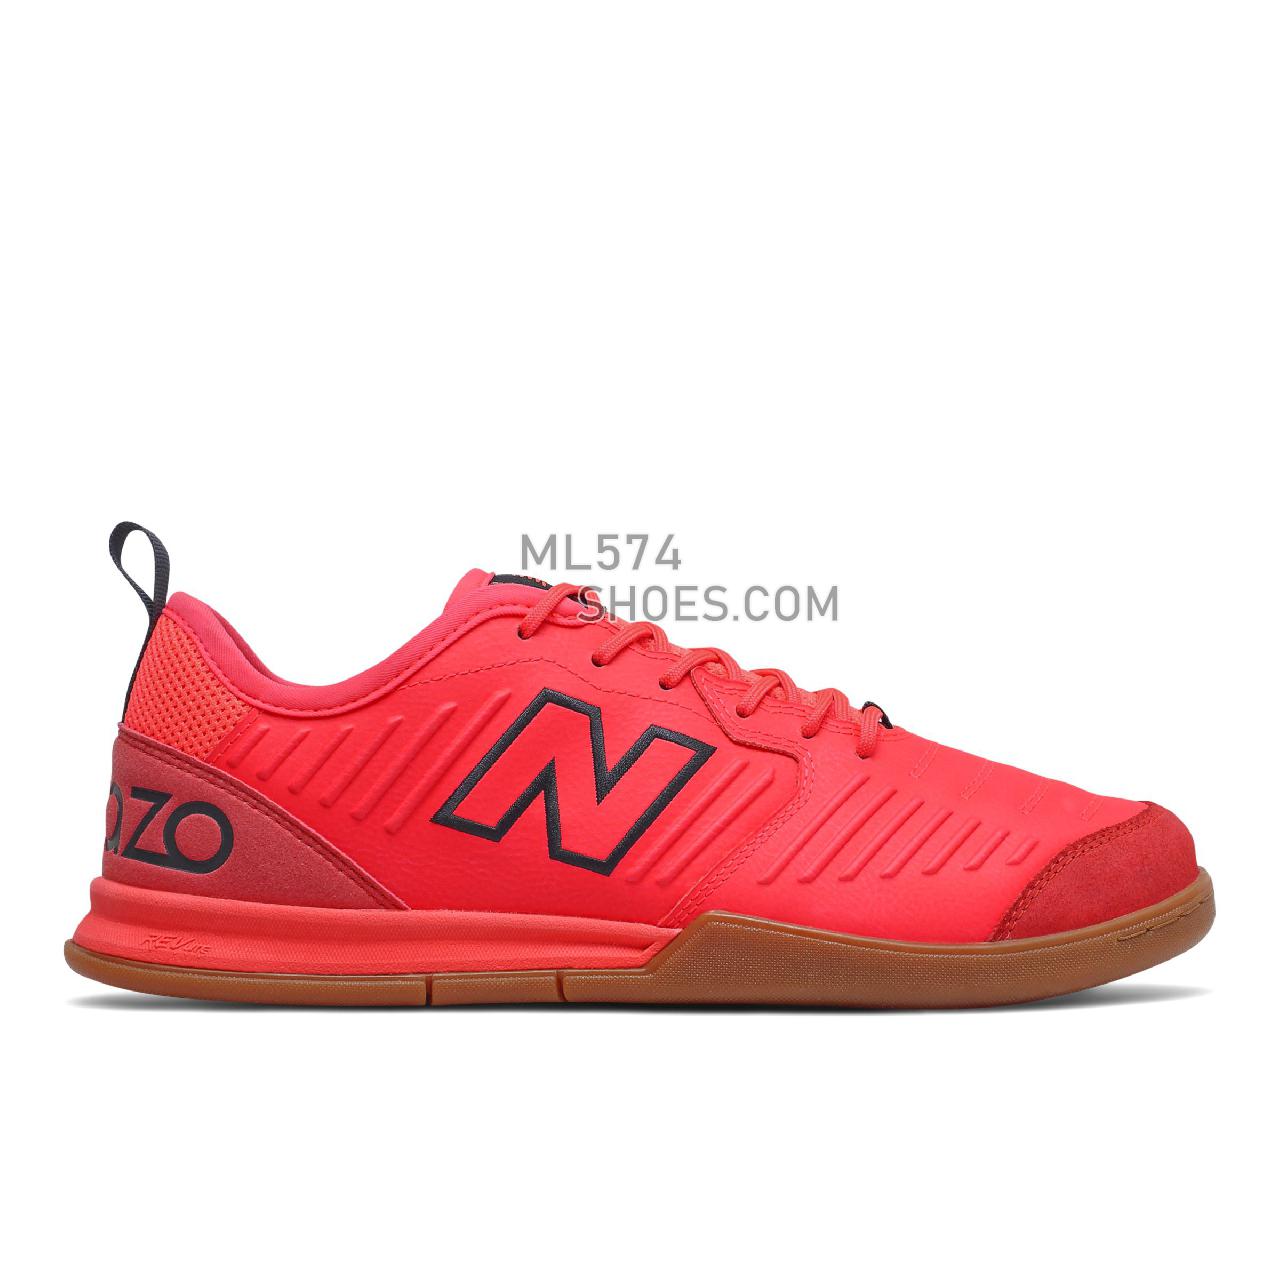 New Balance Audazo v5 Command IN - Men's Classic Sneakers - Vivid Coral with Outerspace - MSA2IVC5